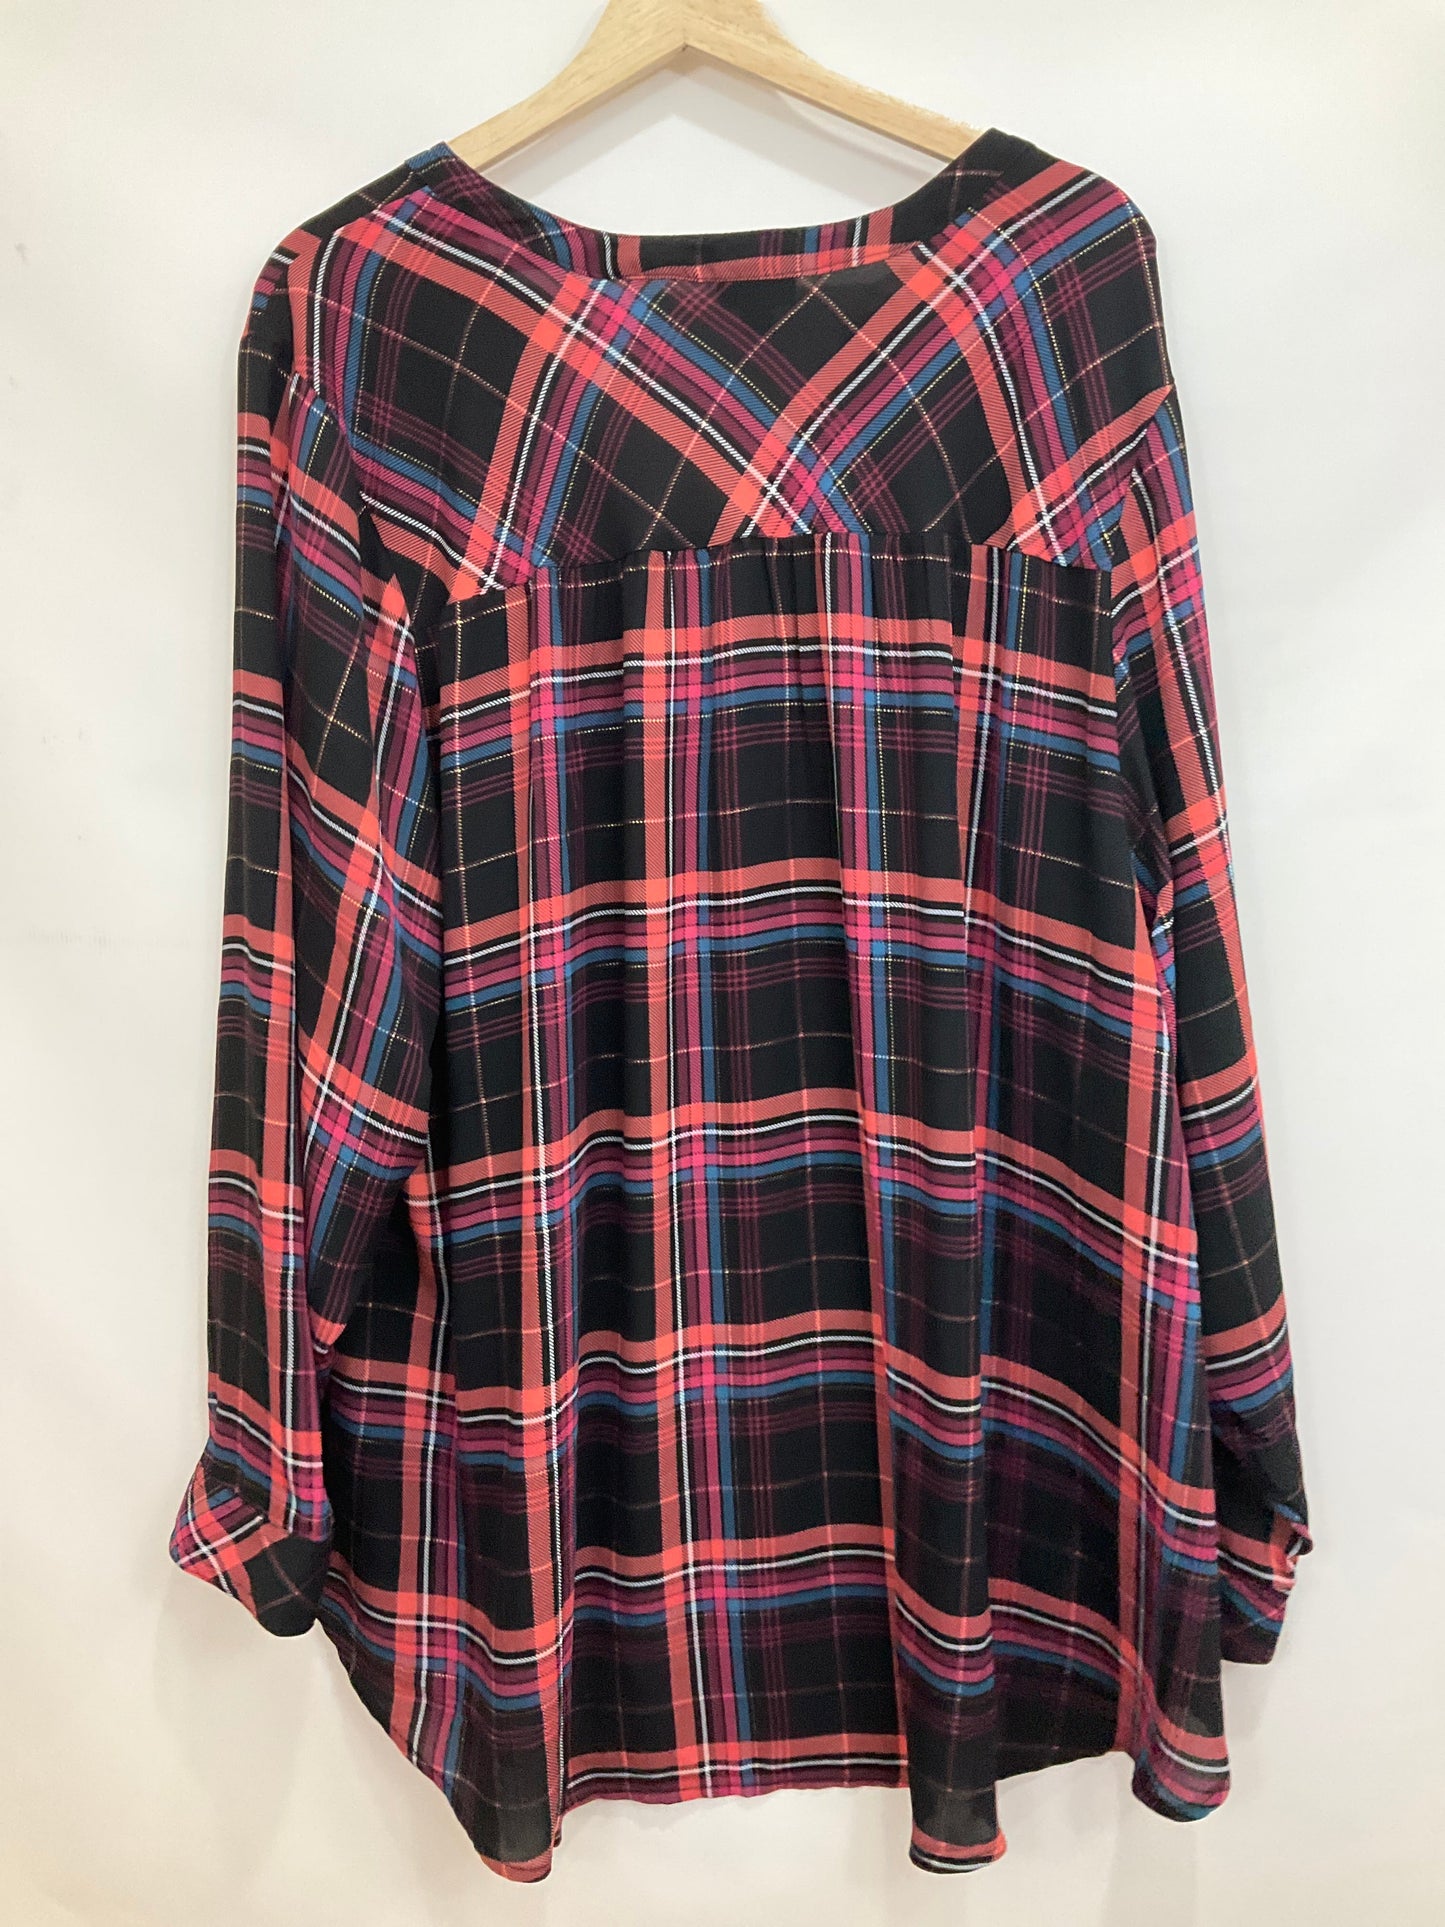 Blouse Long Sleeve By Torrid  Size: 4x